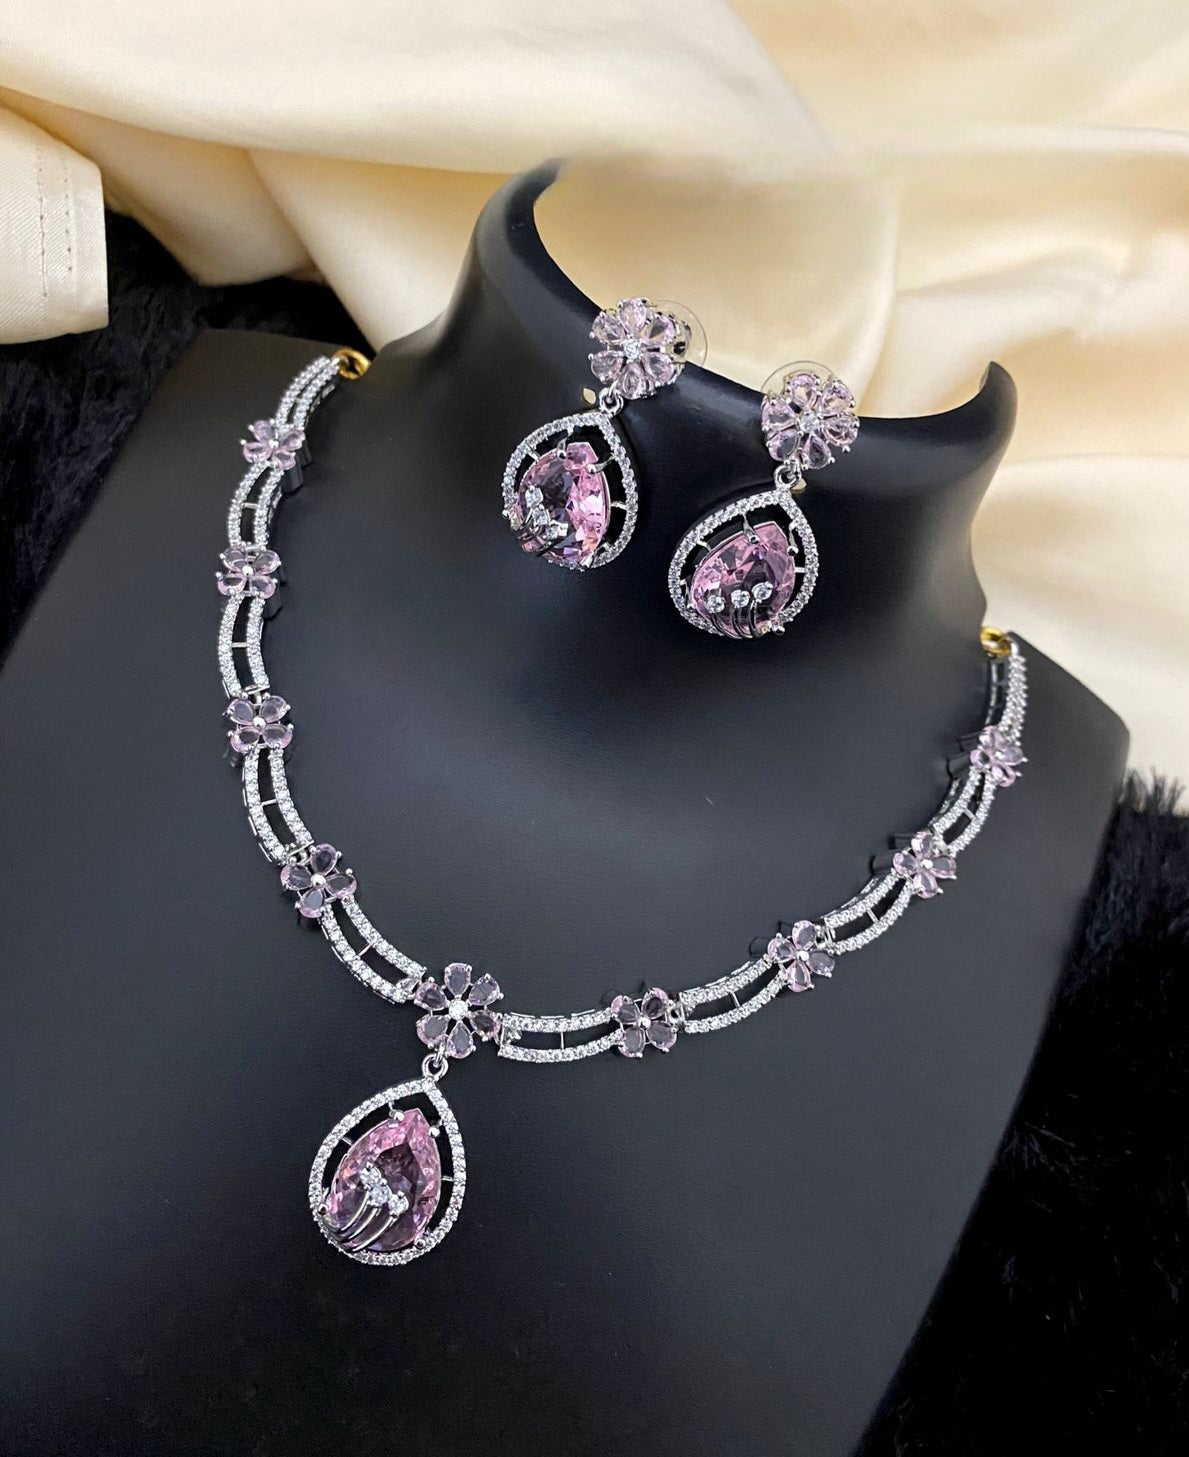 Amazon.com: Hot Pink Rhinestone Silver Crystal Fuchsia Pageant Necklace  Jewelry Set Earring Jewelry Charm Pendant Necklace for Women #3298FE859:  Clothing, Shoes & Jewelry